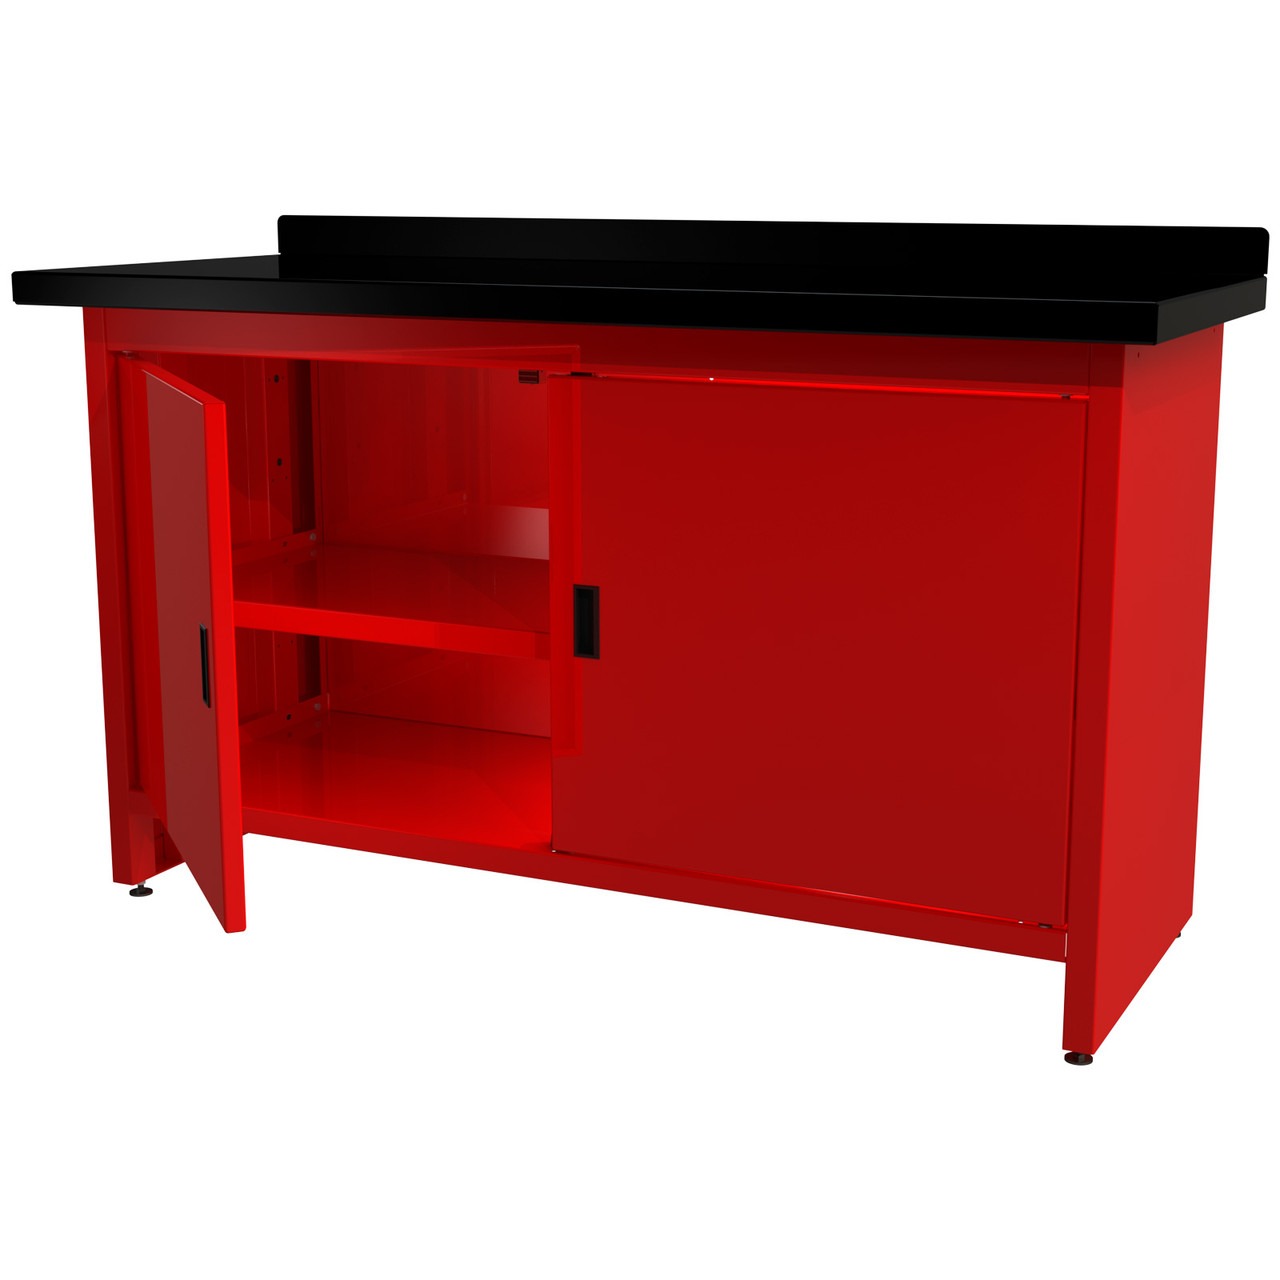 WB-200-30 - 30" Deep Heavy Duty Work Bench with Cabinet from QSP | McBay Performance